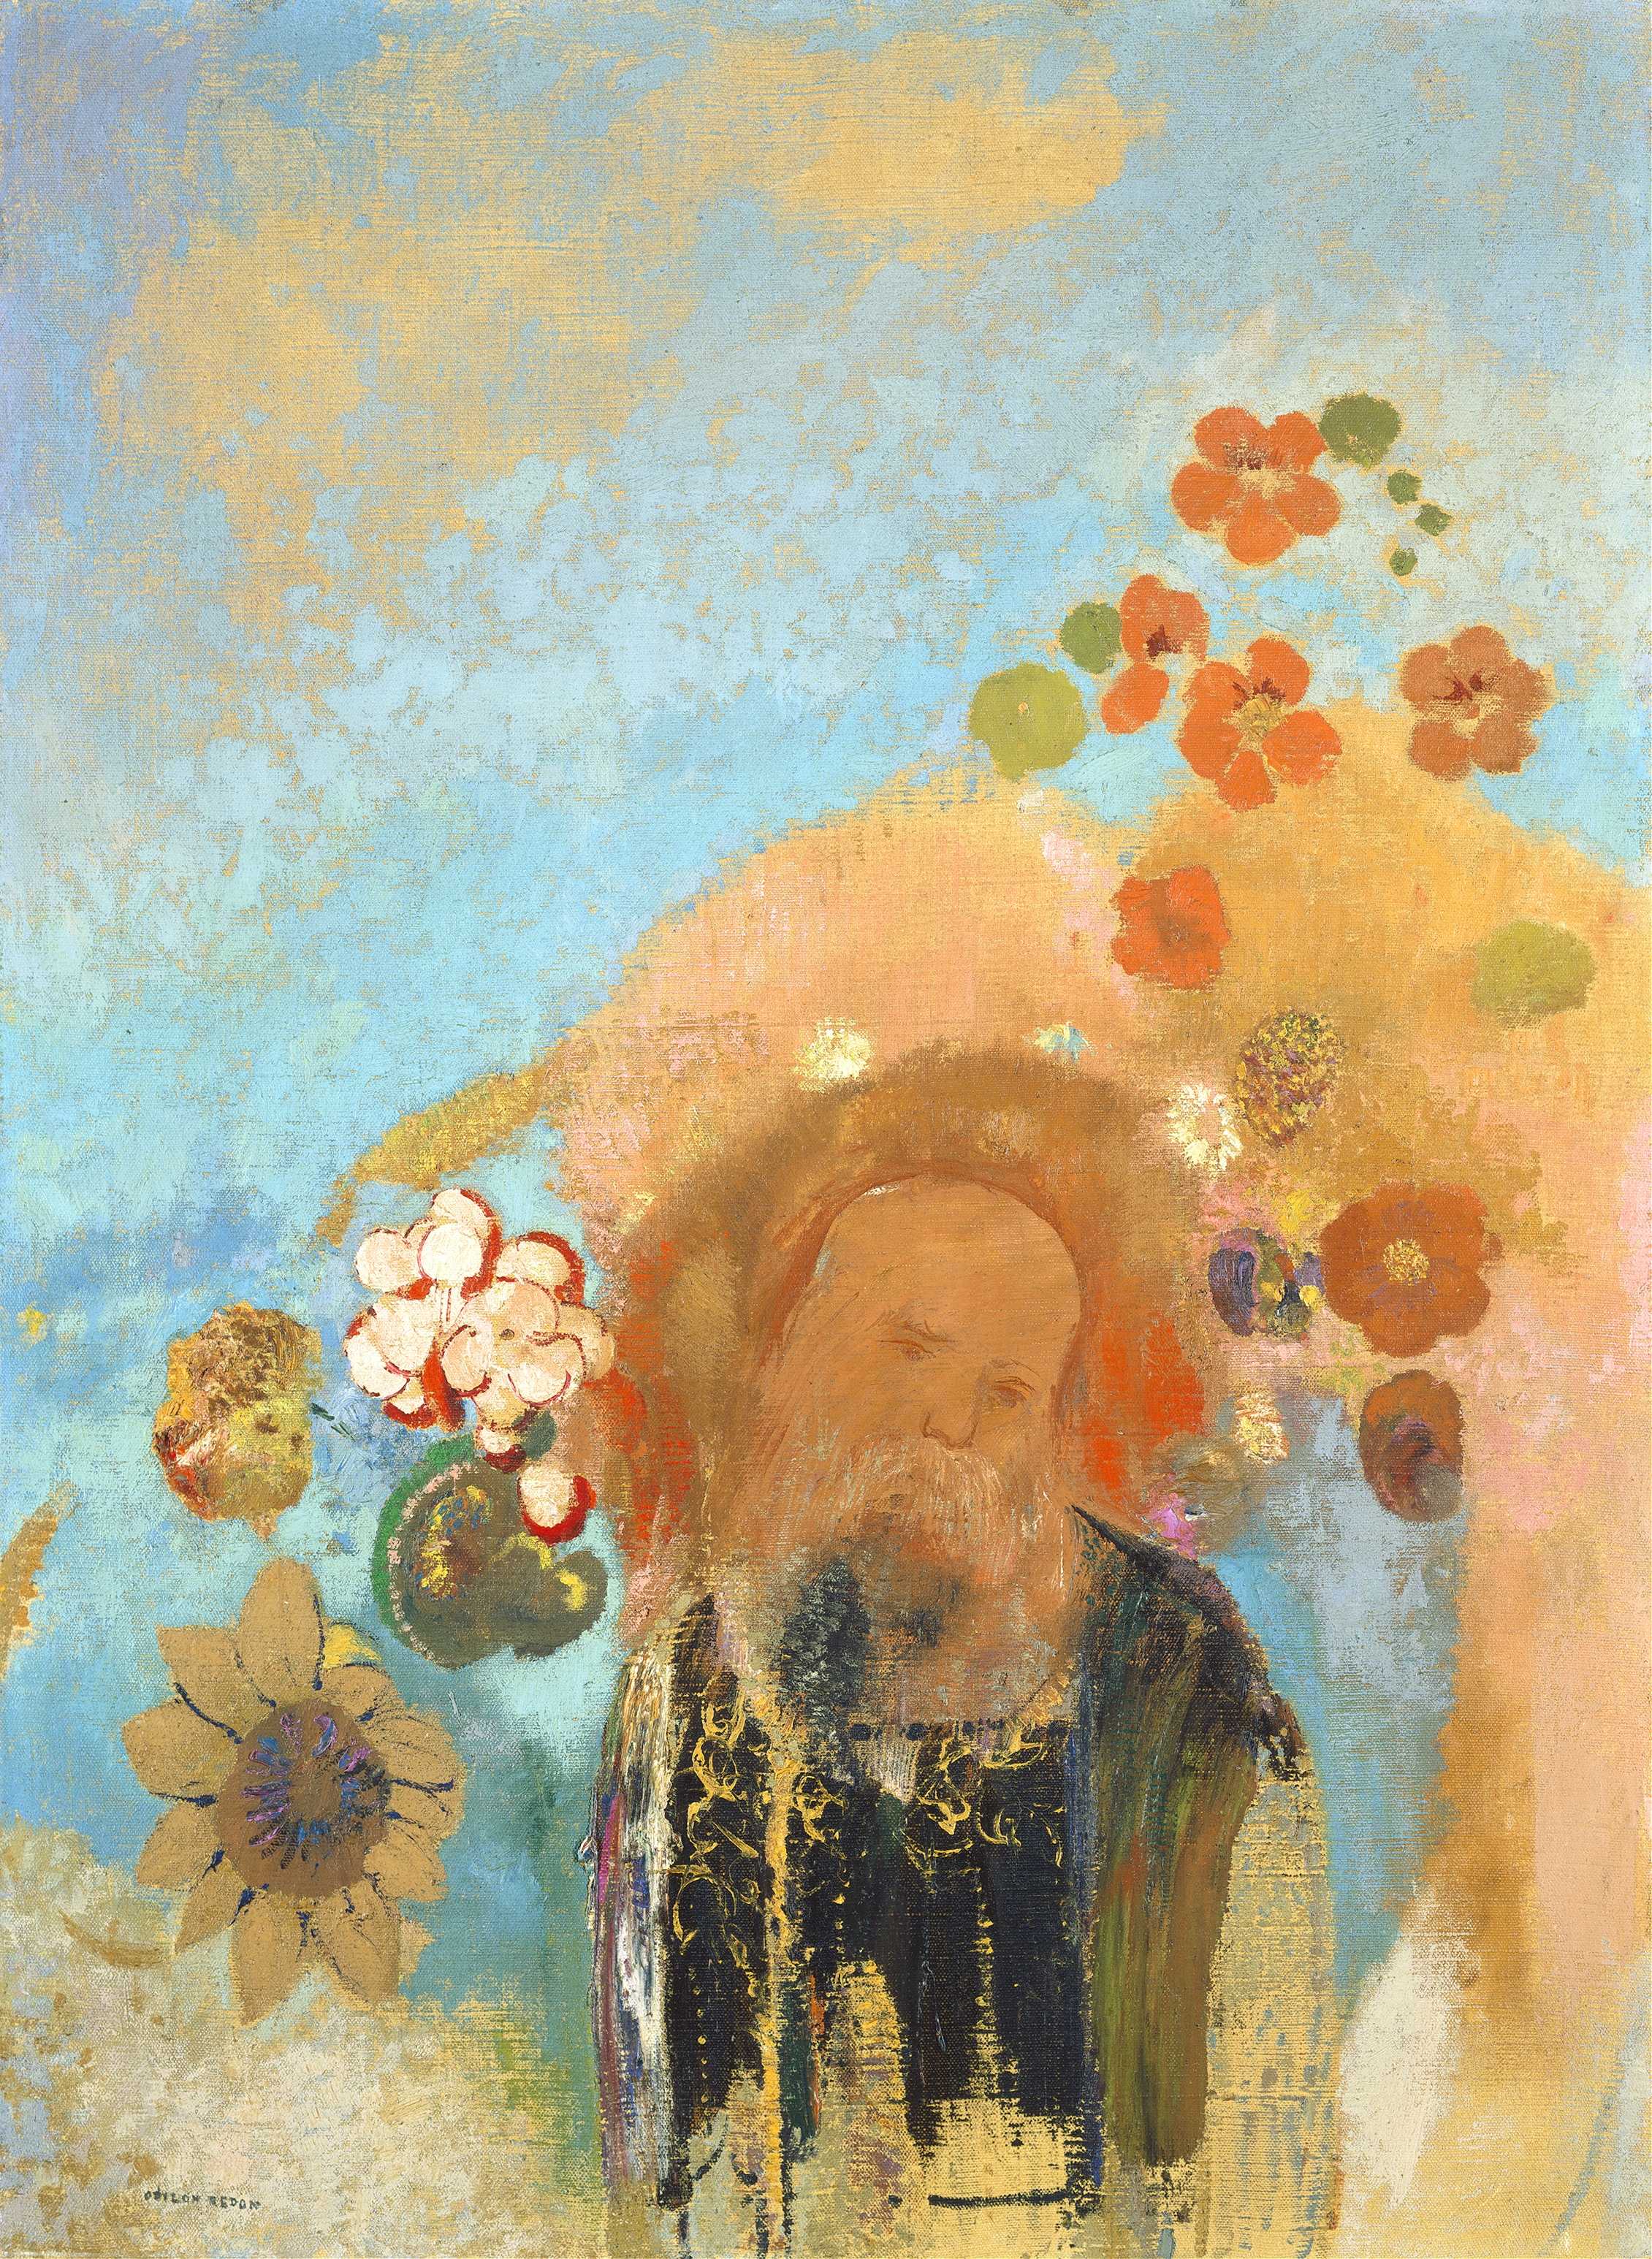 Find out more about Odilon Redon - Evocation of Roussel